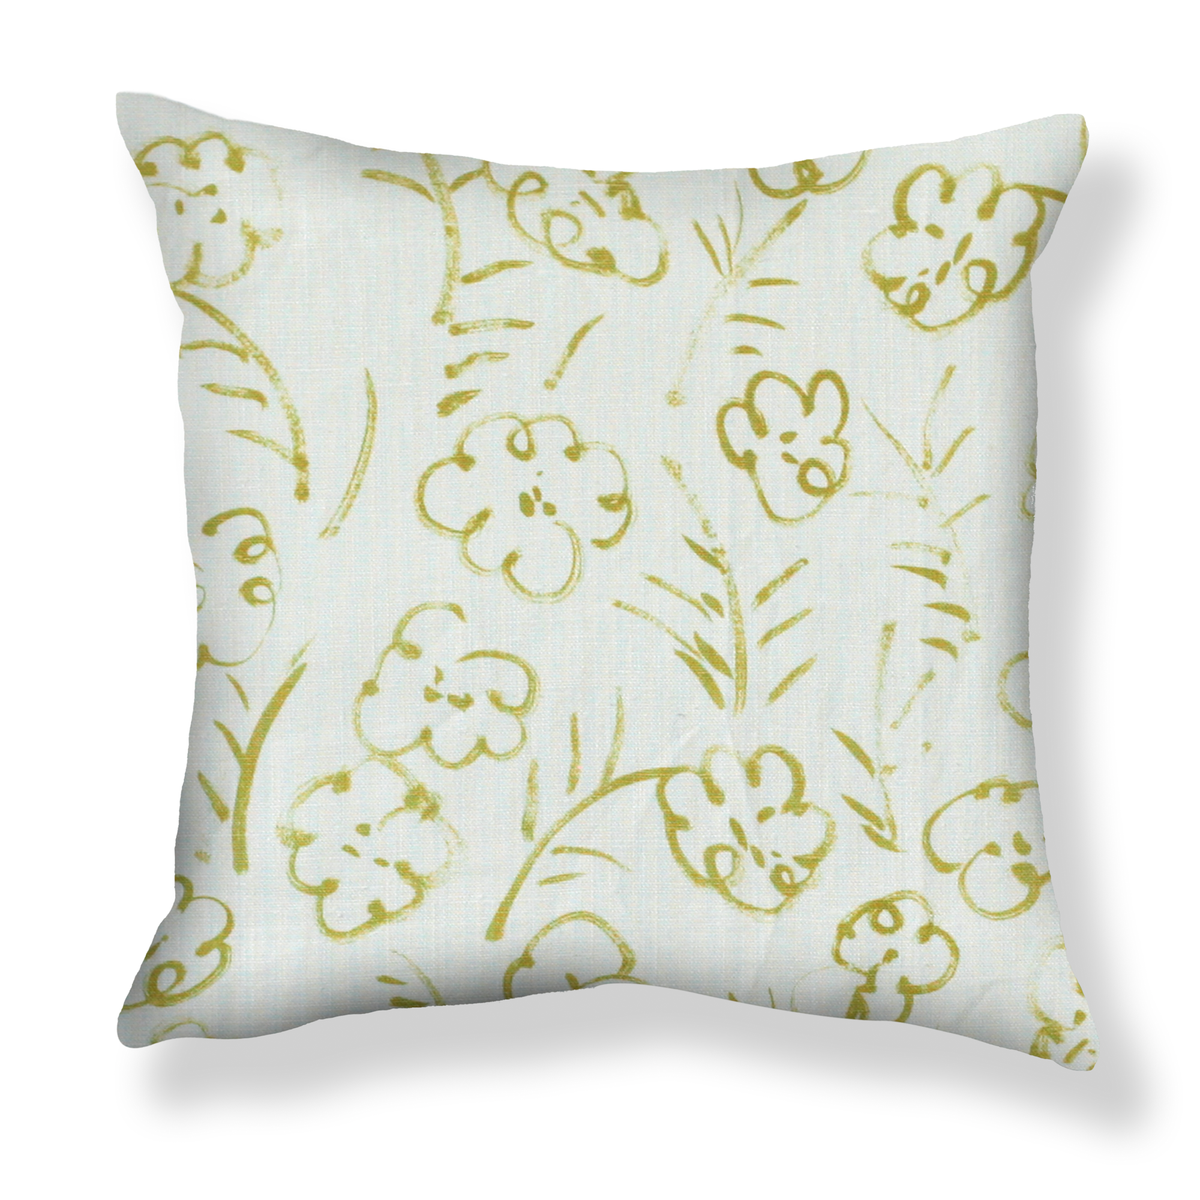 Roses Pillow in Mint/Chartreuse